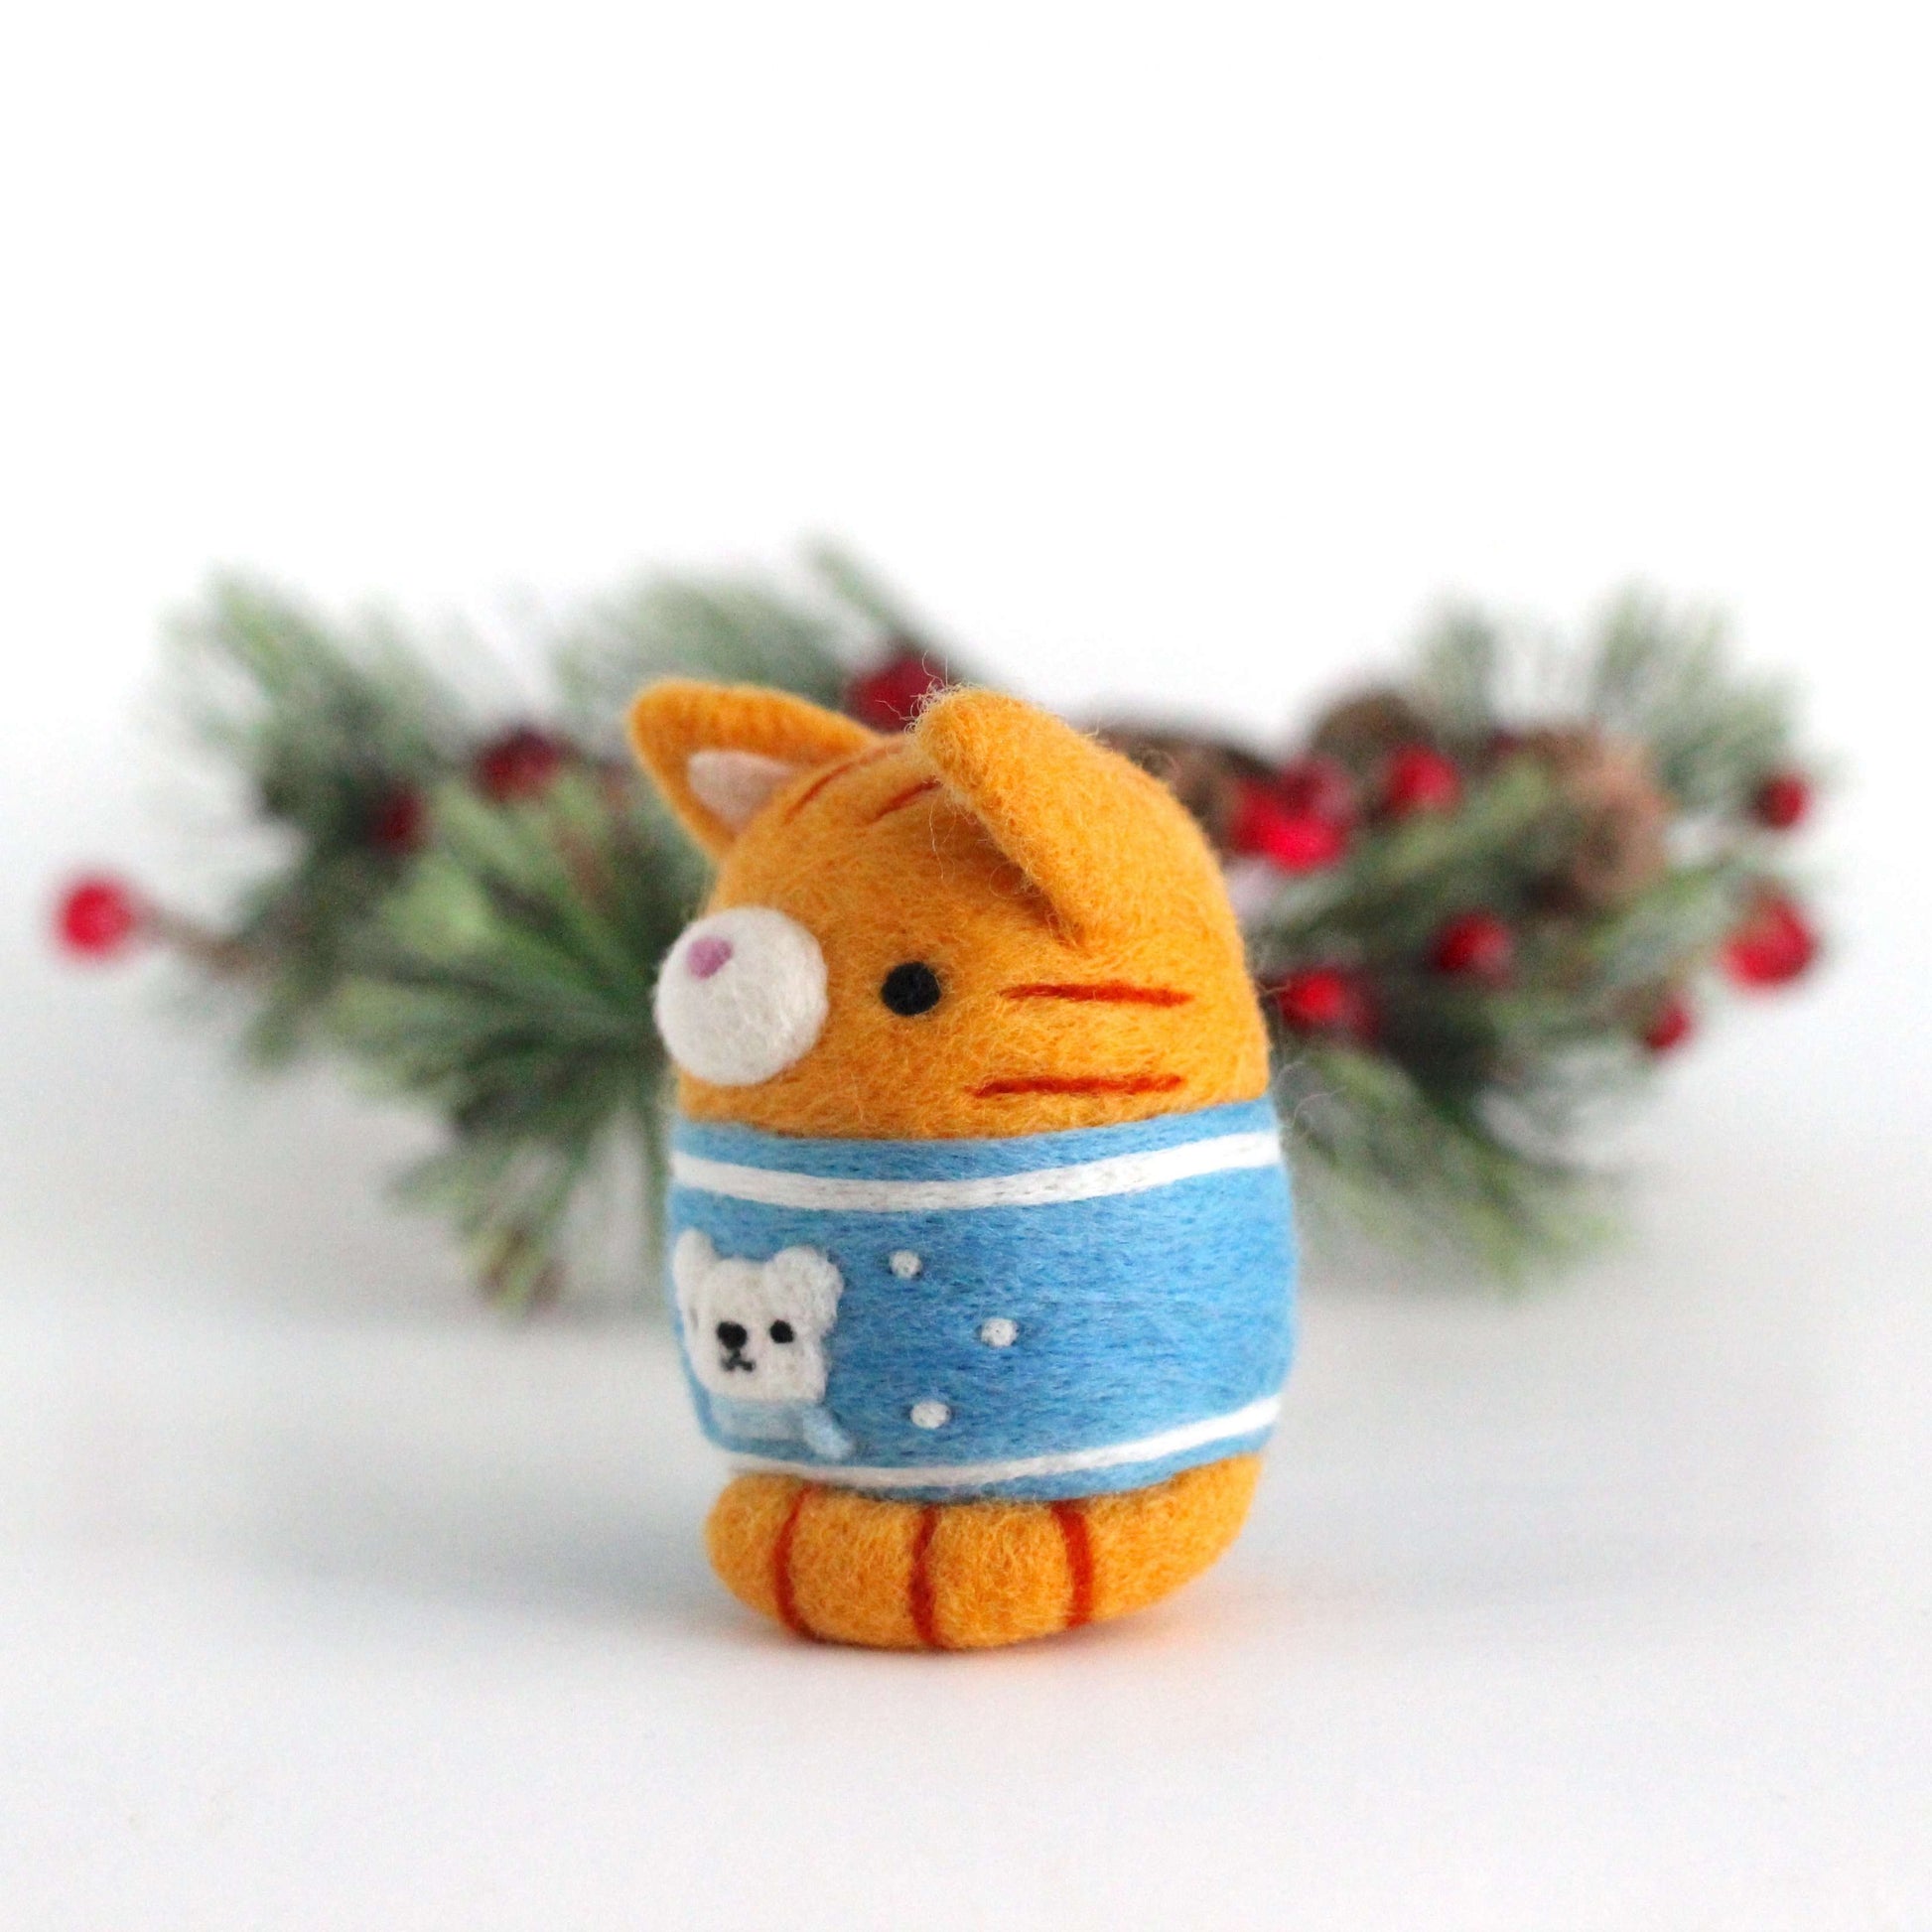 Needle Felted Ginger Tabby Cat in Polar Bear Christmas Sweater by Wild Whimsy Woolies